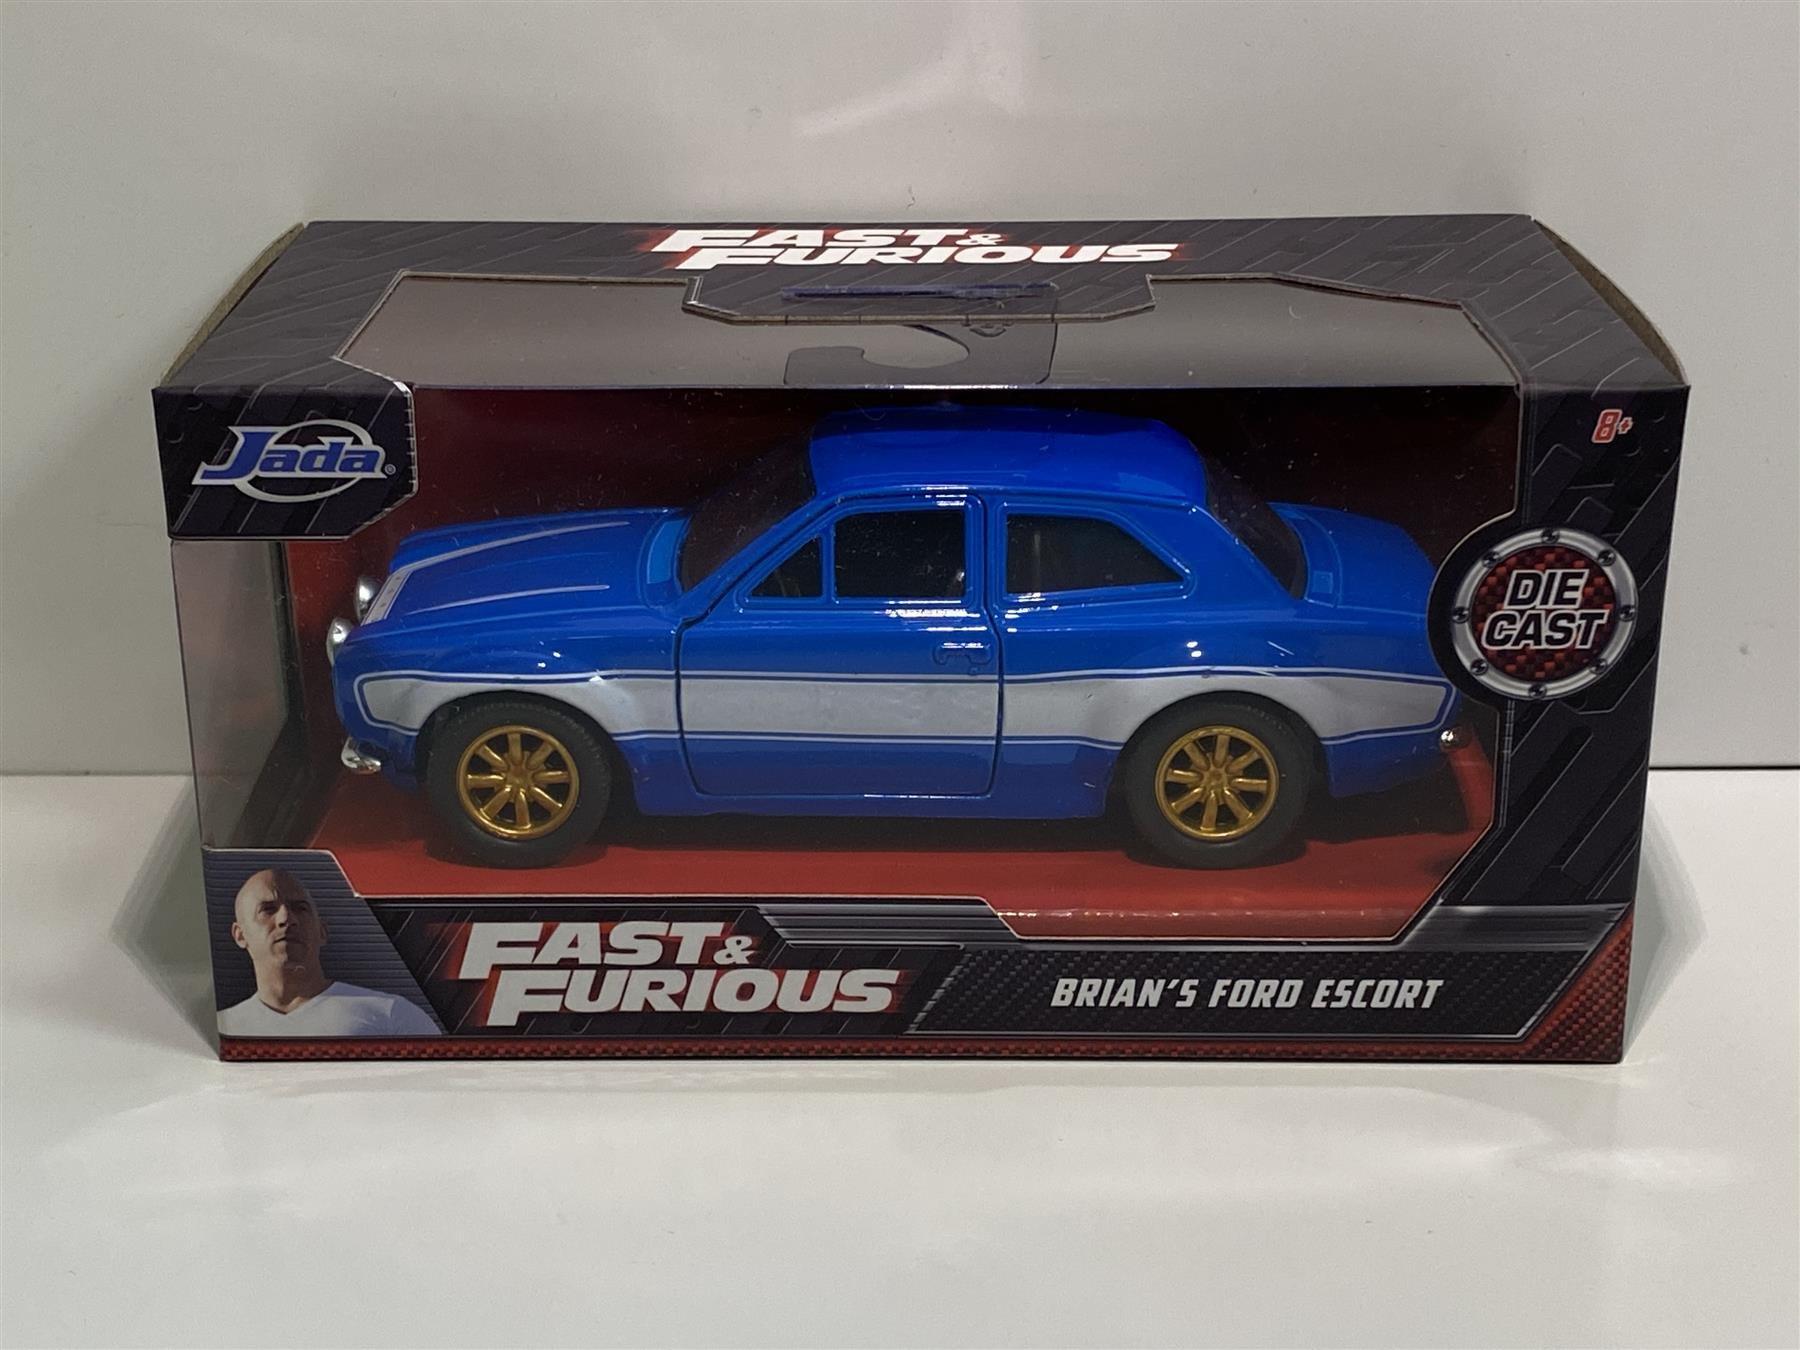 Fast and Furious Brians Ford Escort 1:32 Scale Jada 97188